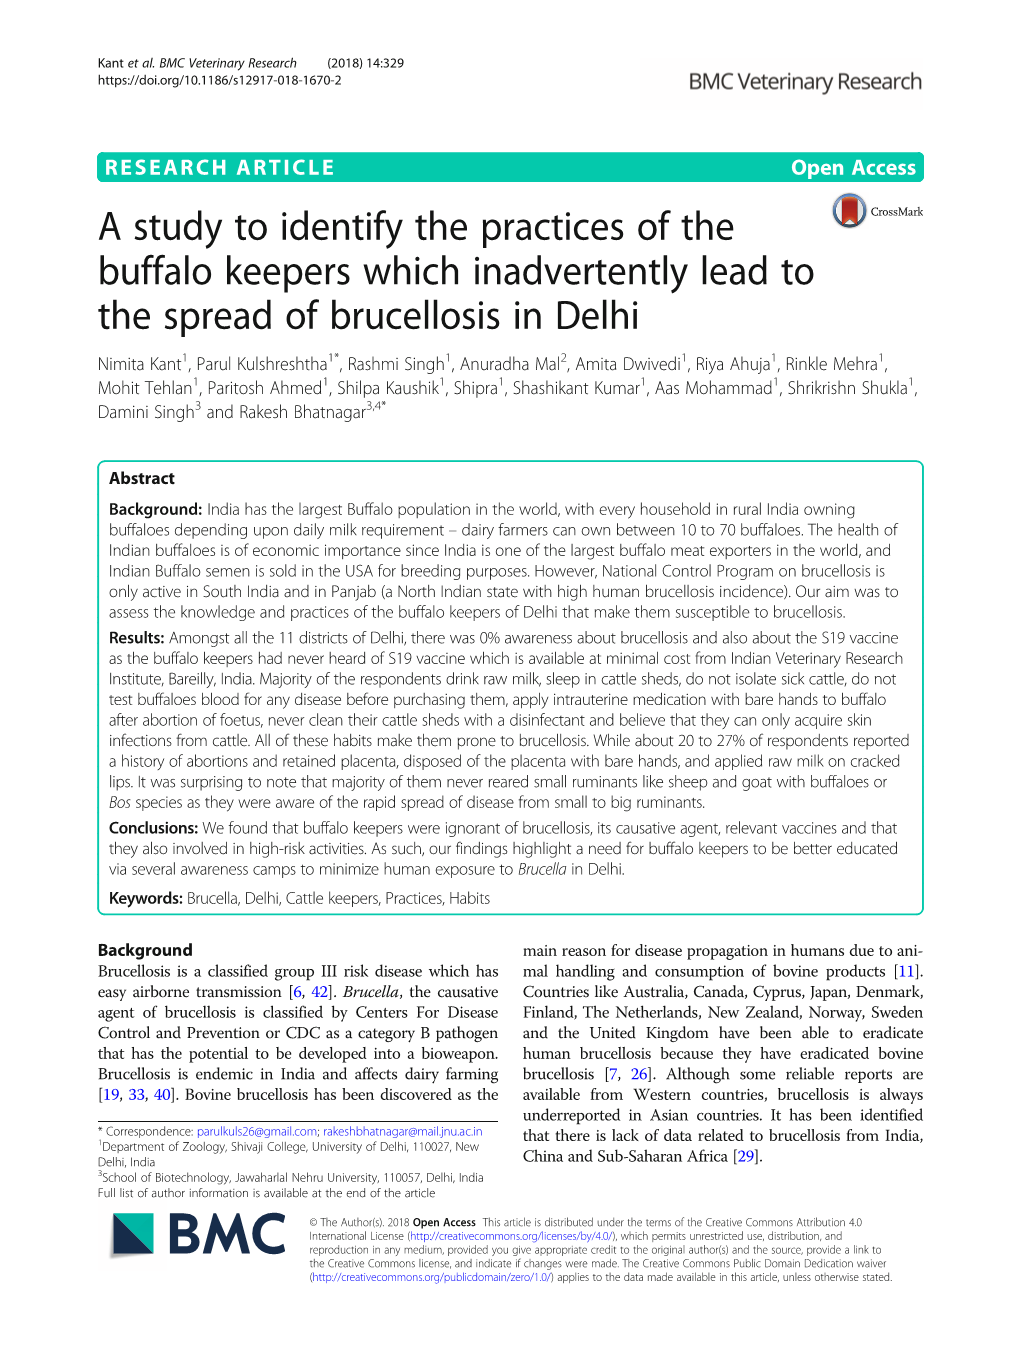 A Study to Identify the Practices of the Buffalo Keepers Which Inadvertently